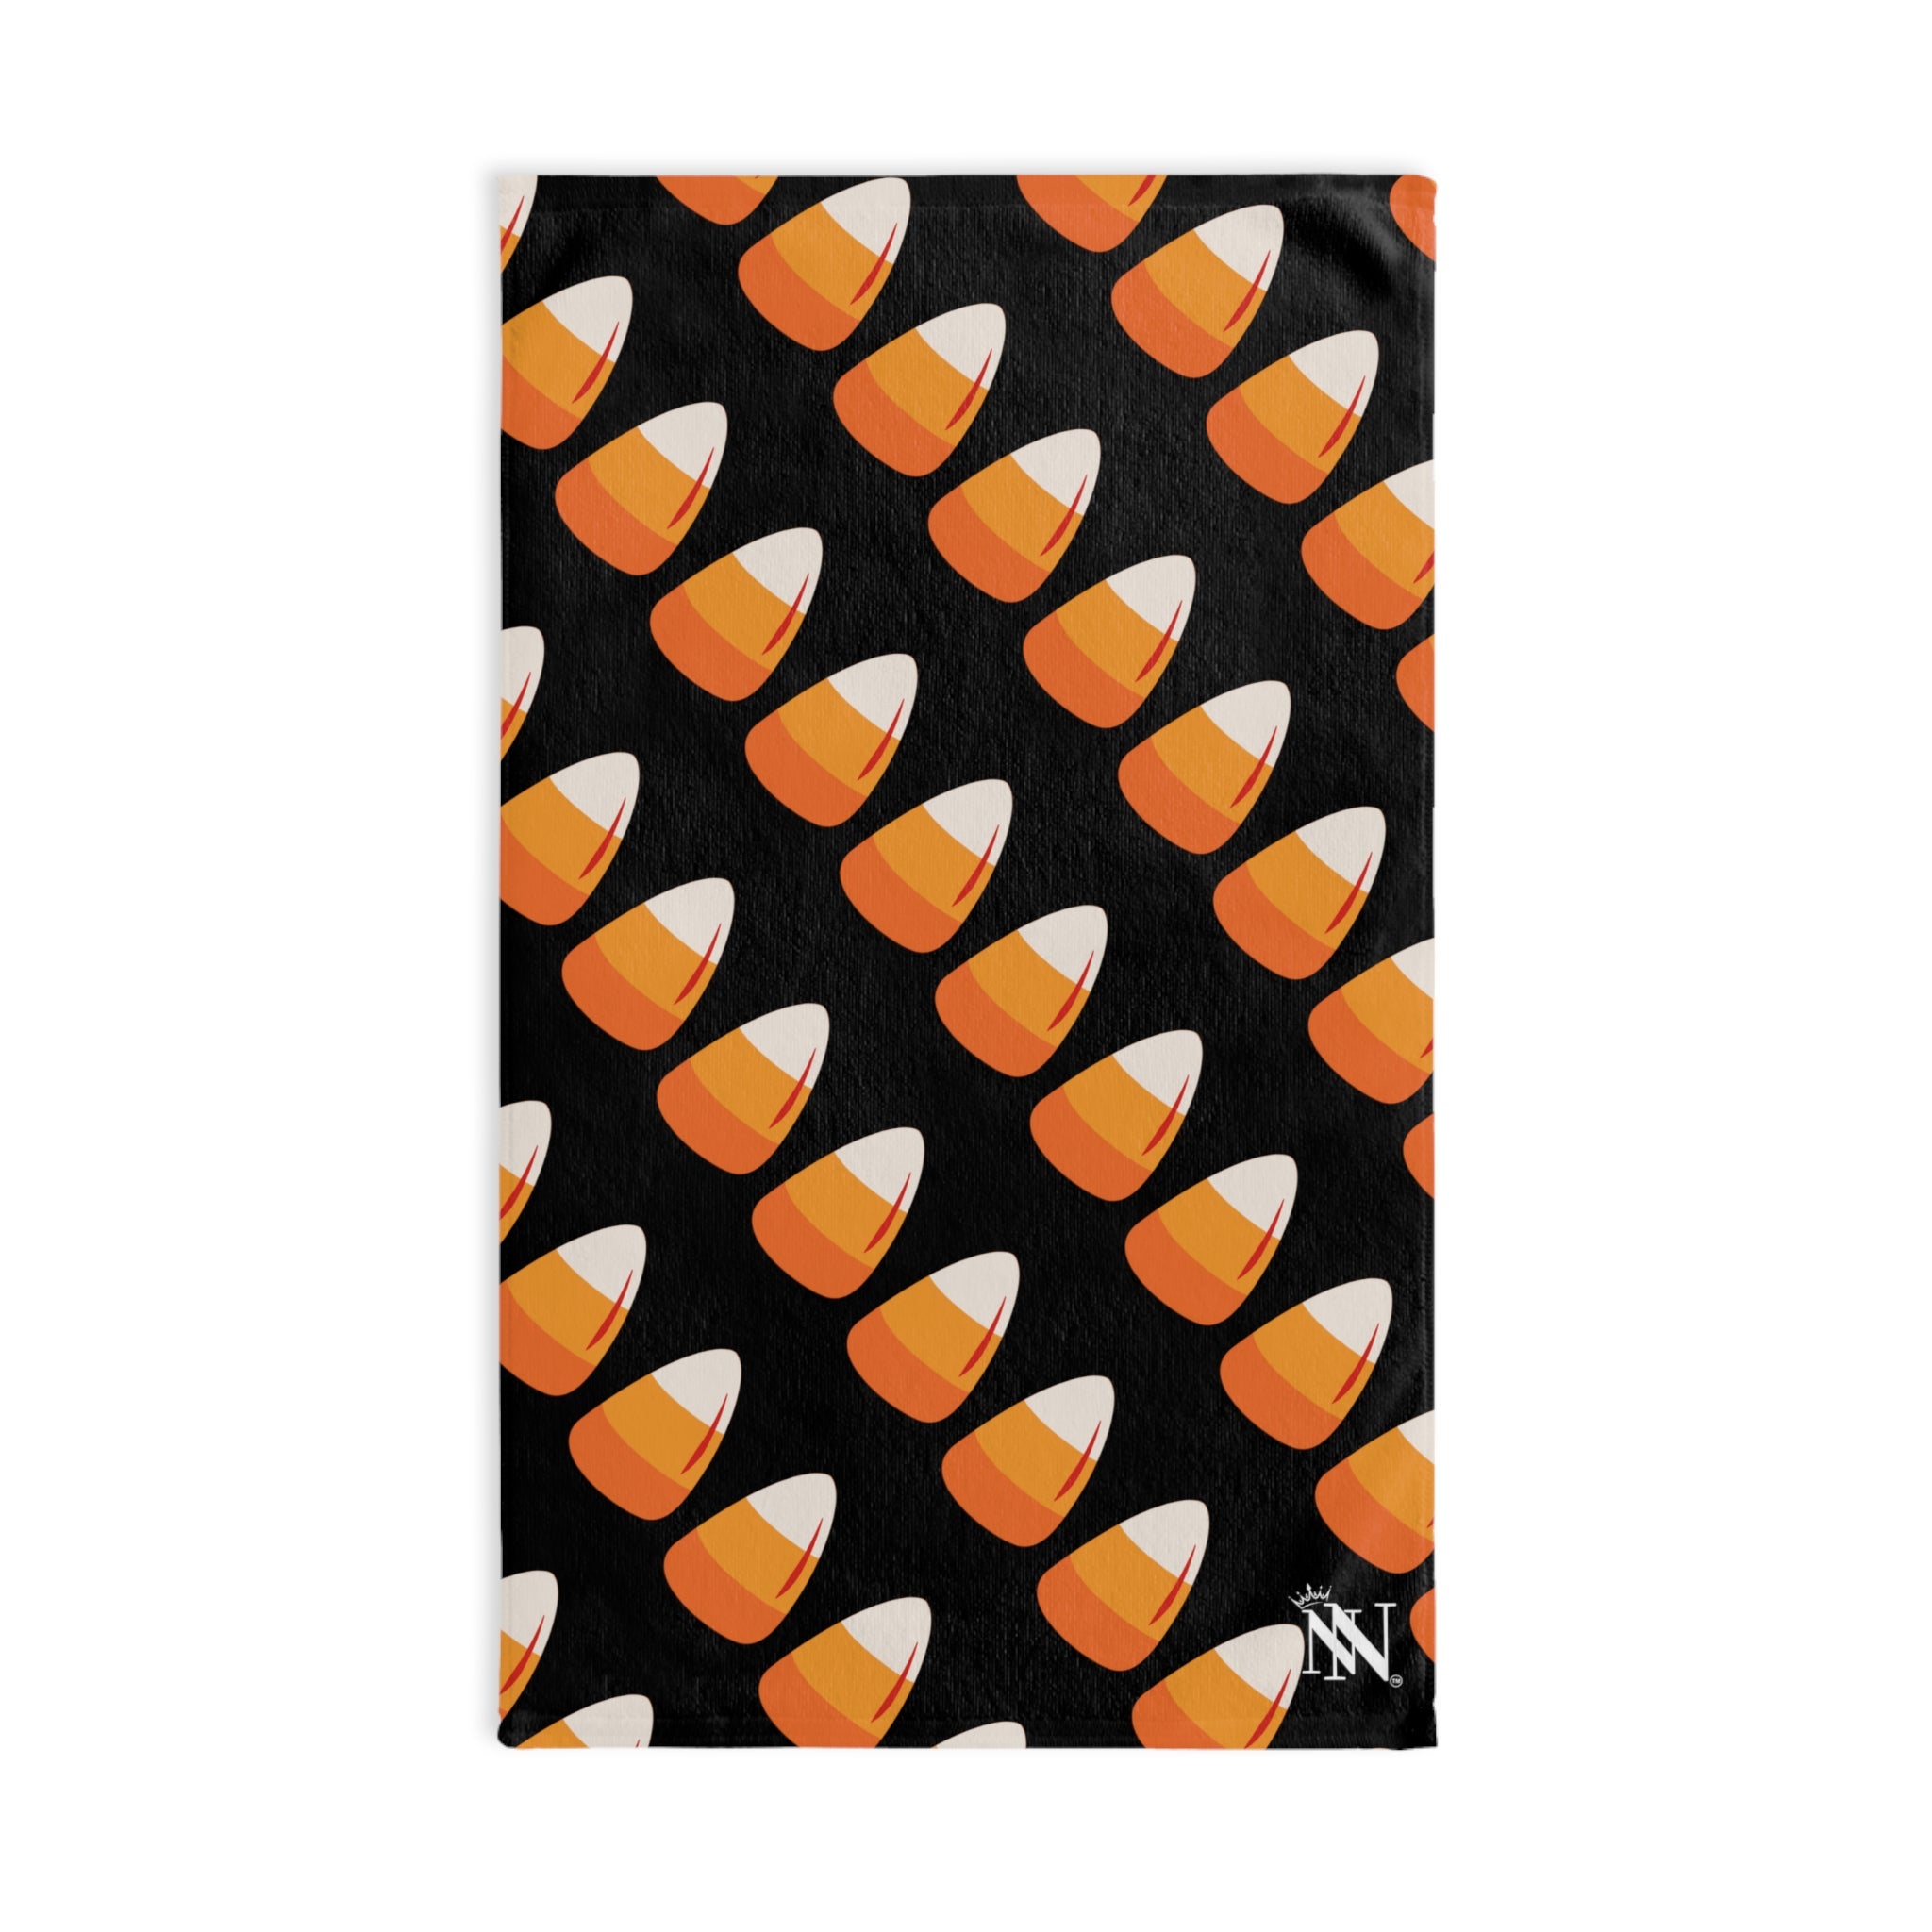 Candy Corn Black | Sexy Gifts for Boyfriend, Funny Towel Romantic Gift for Wedding Couple Fiance First Year 2nd Anniversary Valentines, Party Gag Gifts, Joke Humor Cloth for Husband Men BF NECTAR NAPKINS